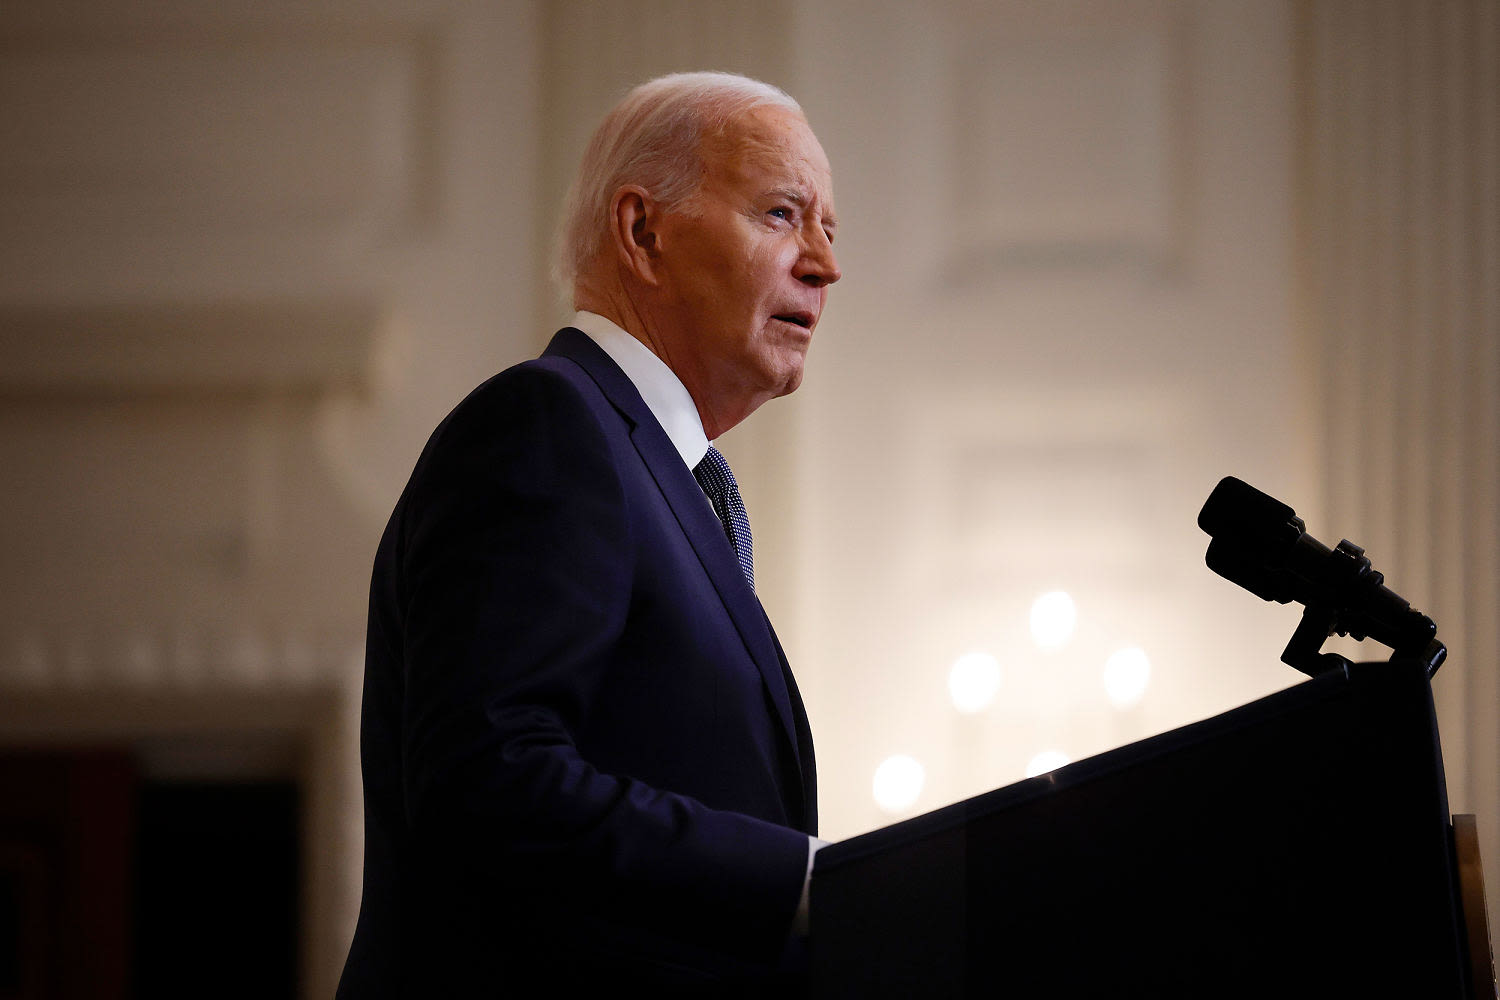 Biden announces Israel has offered a three-part proposal to end the war in Gaza